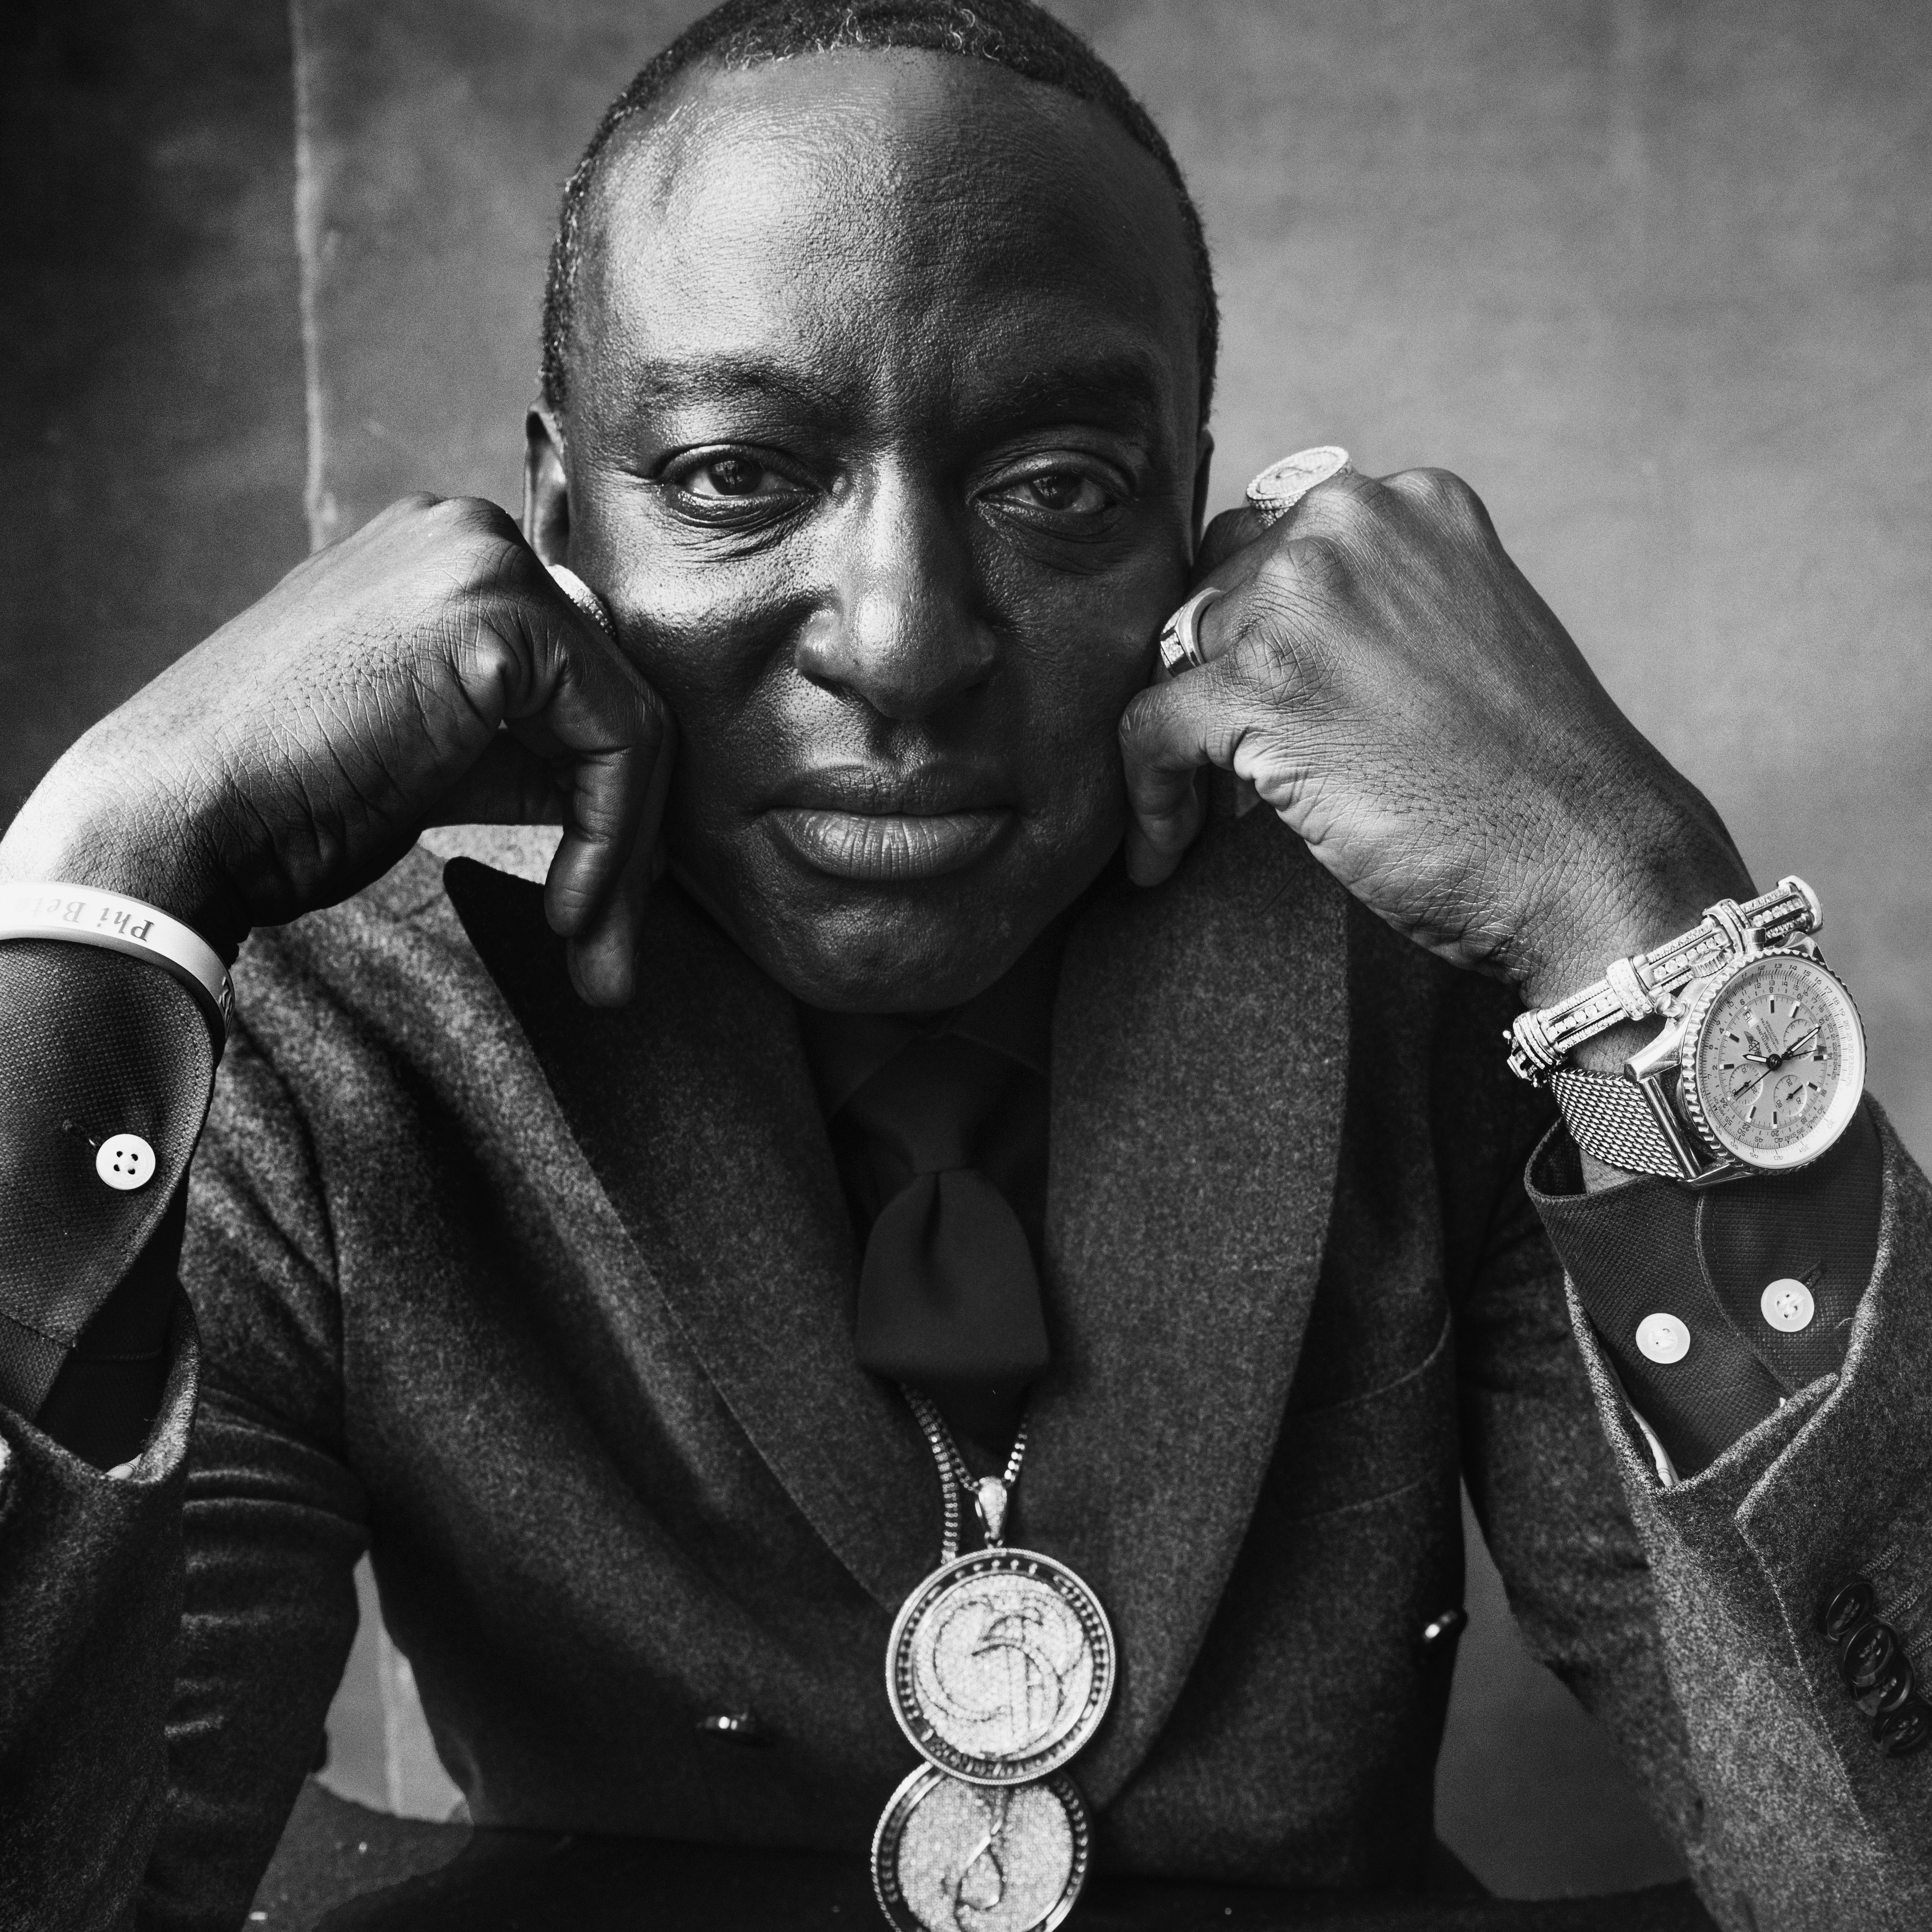 Yusef Salaam and the Act of Forgiveness